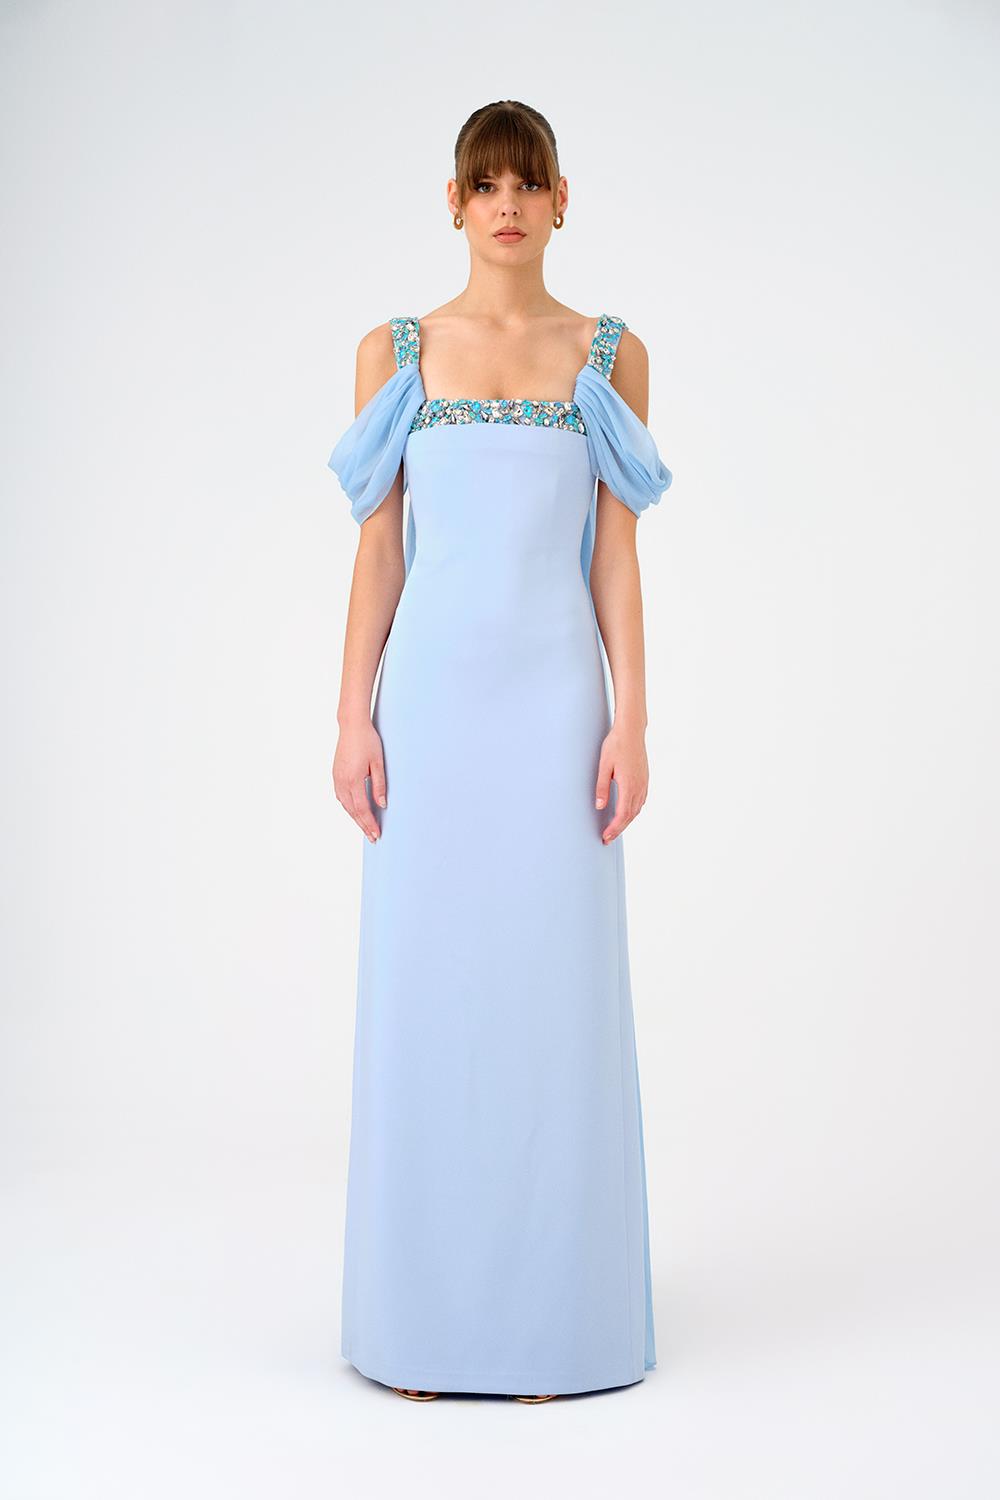 Chiffon Cape Stone Embroidered Long Evening Dress with Straps